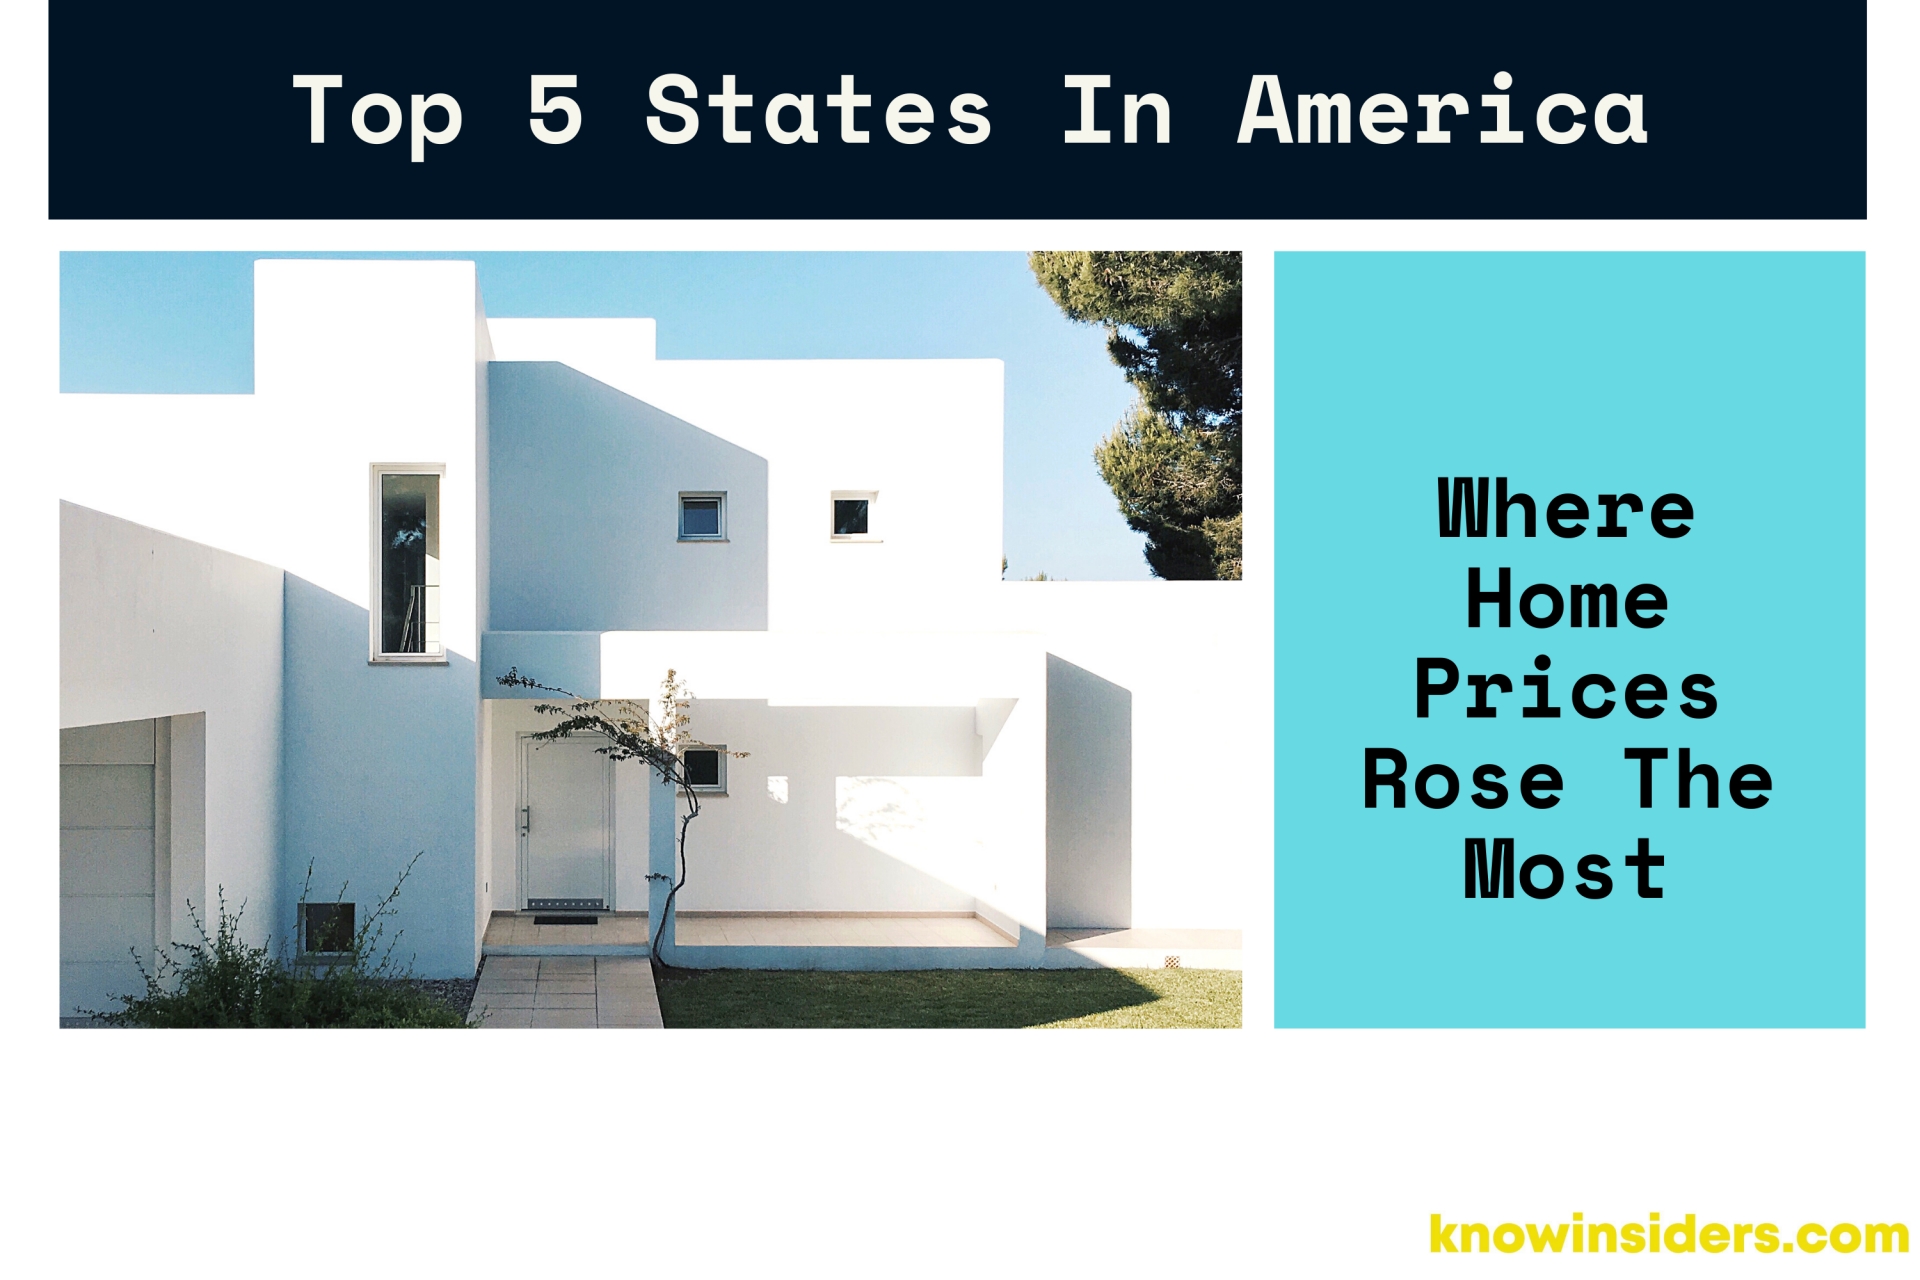 Top 5 States In America Where Home Prices Rose The Most